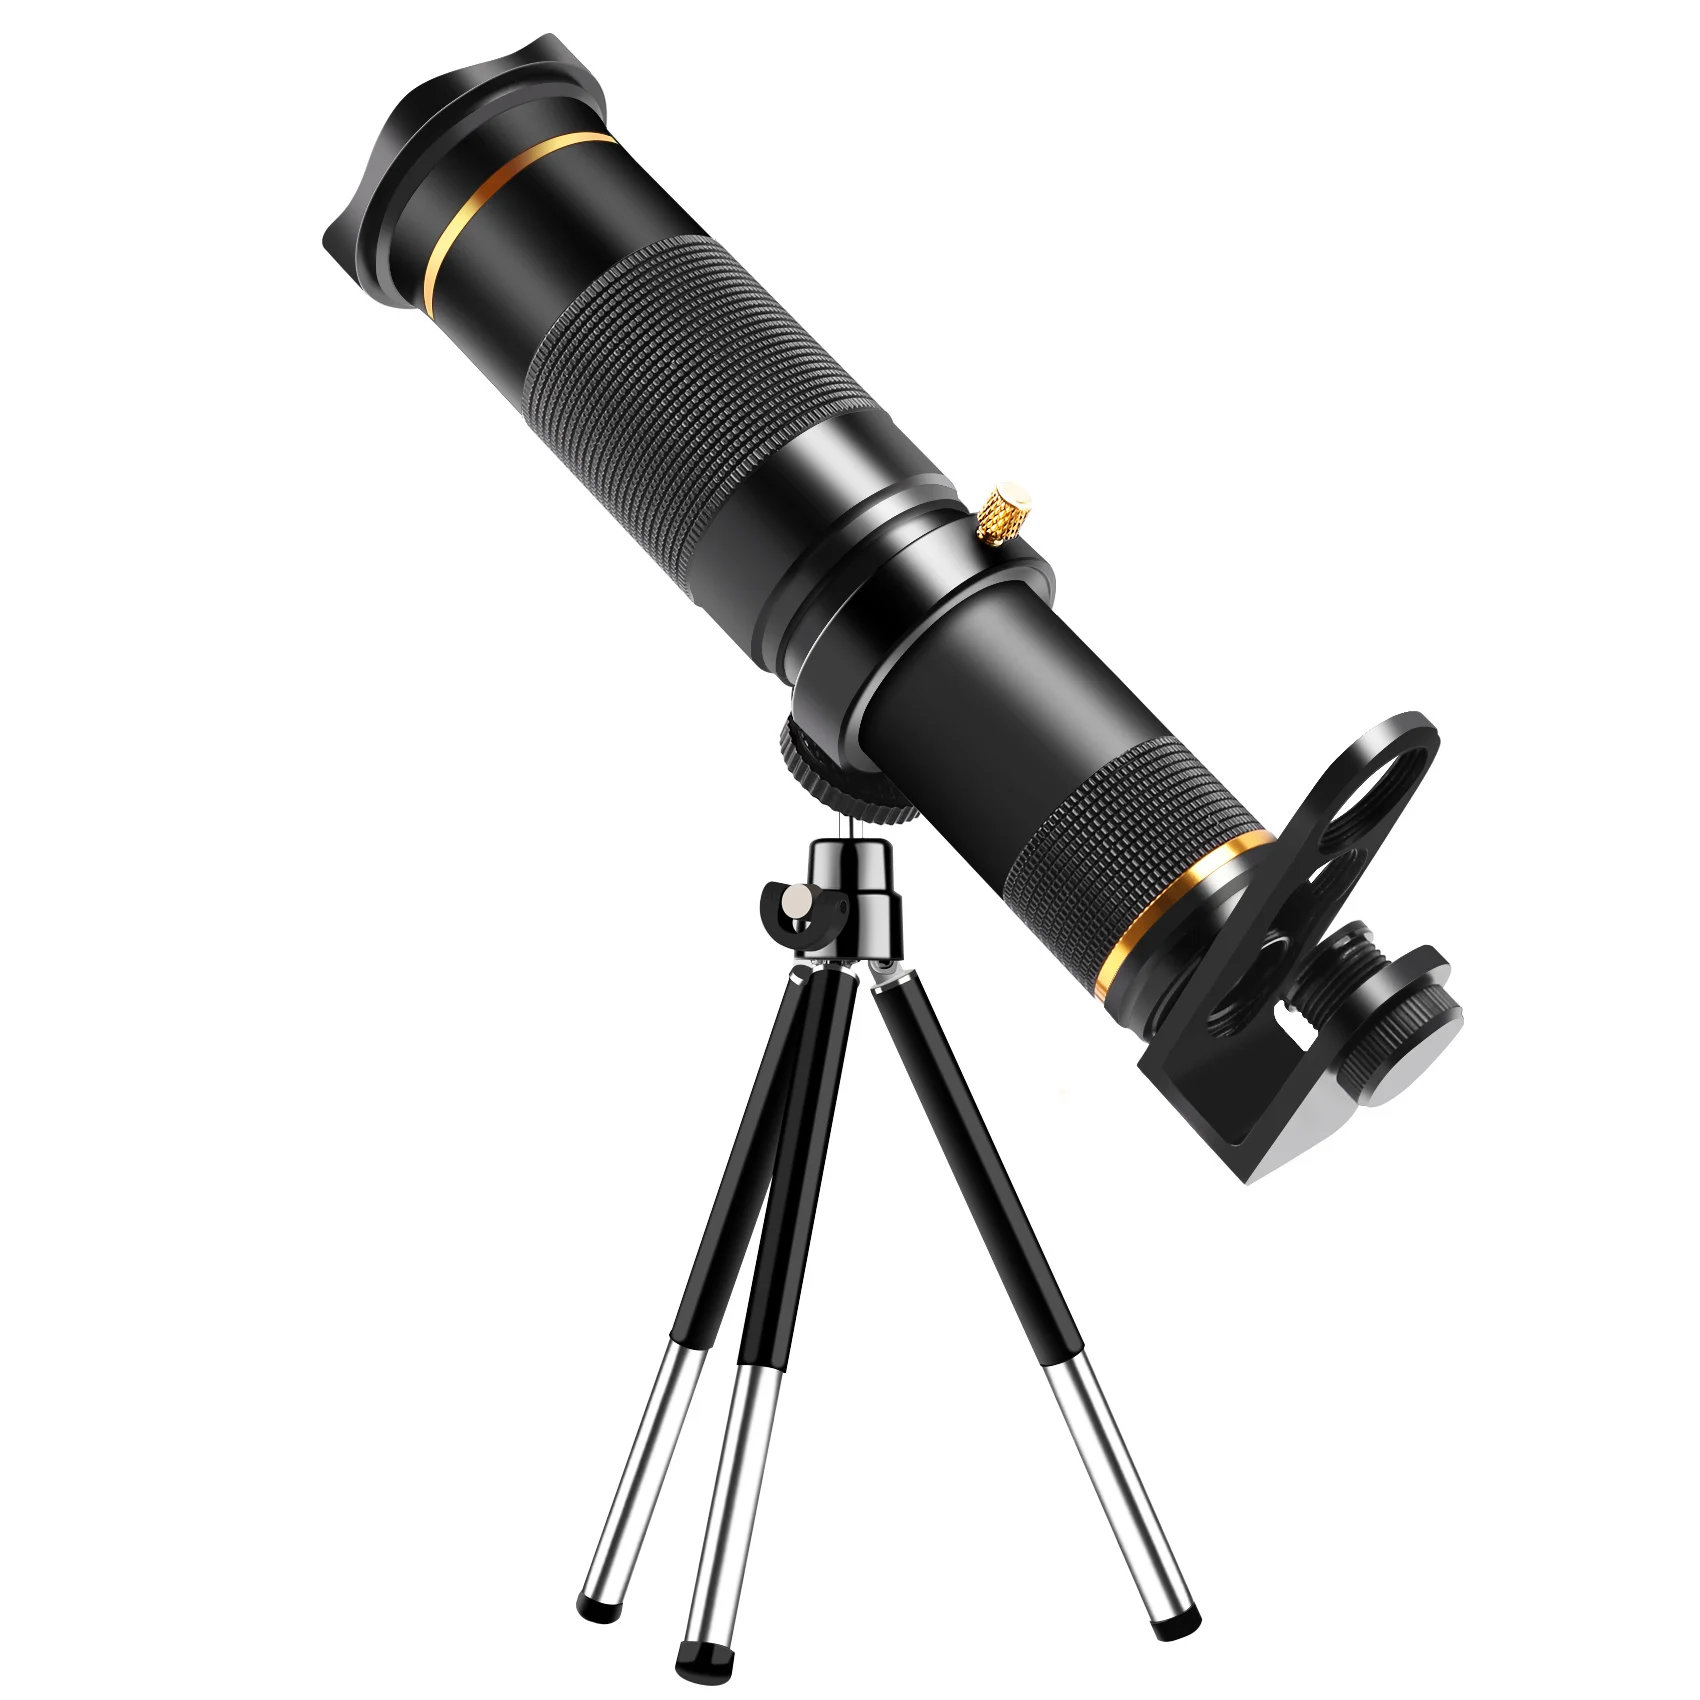 

38X Telephoto Lens HD Monocular Telescope Phone Camera Lens for IPhone 11 Xs Max XR X 8 7 Plus Android Smartphone Mobile